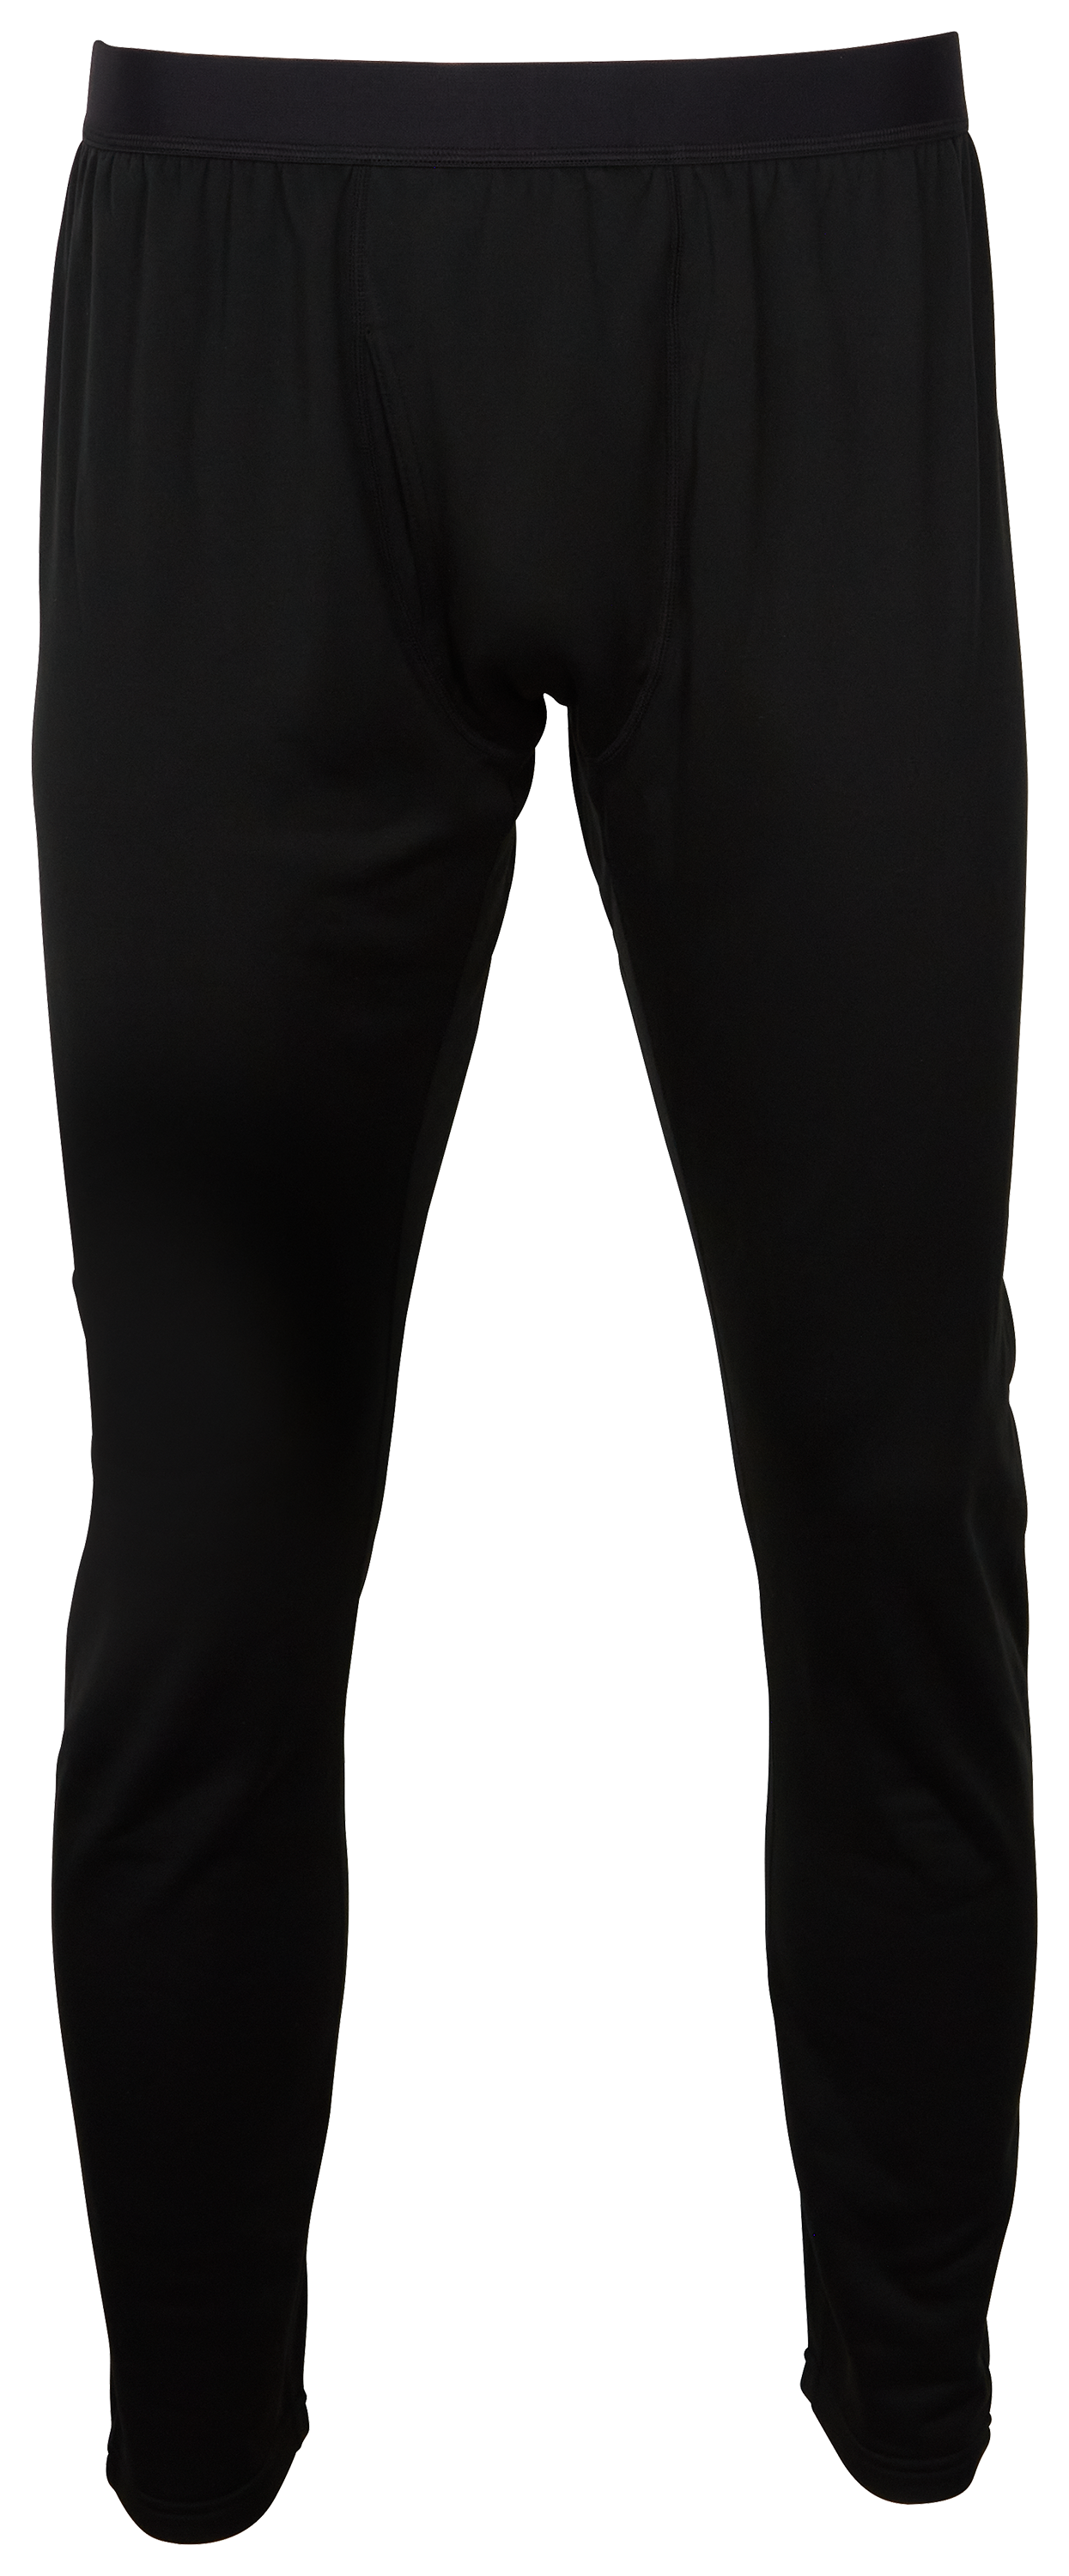 Cabela's E.C.W.C.S. Thermal Zone Base-Layer Pants for Men